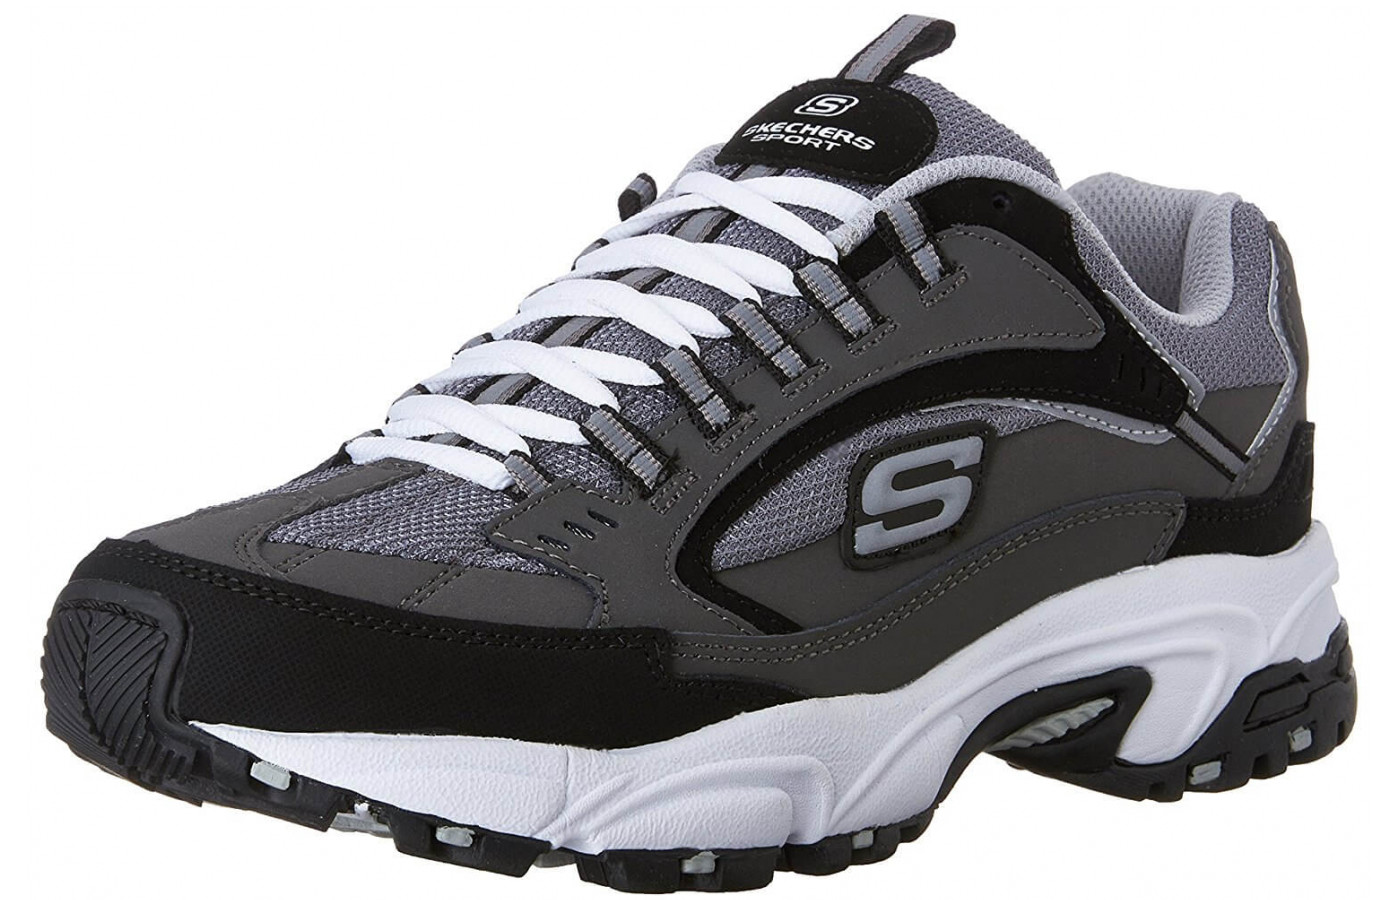 Skechers Stamina Cutback front angled perspective 